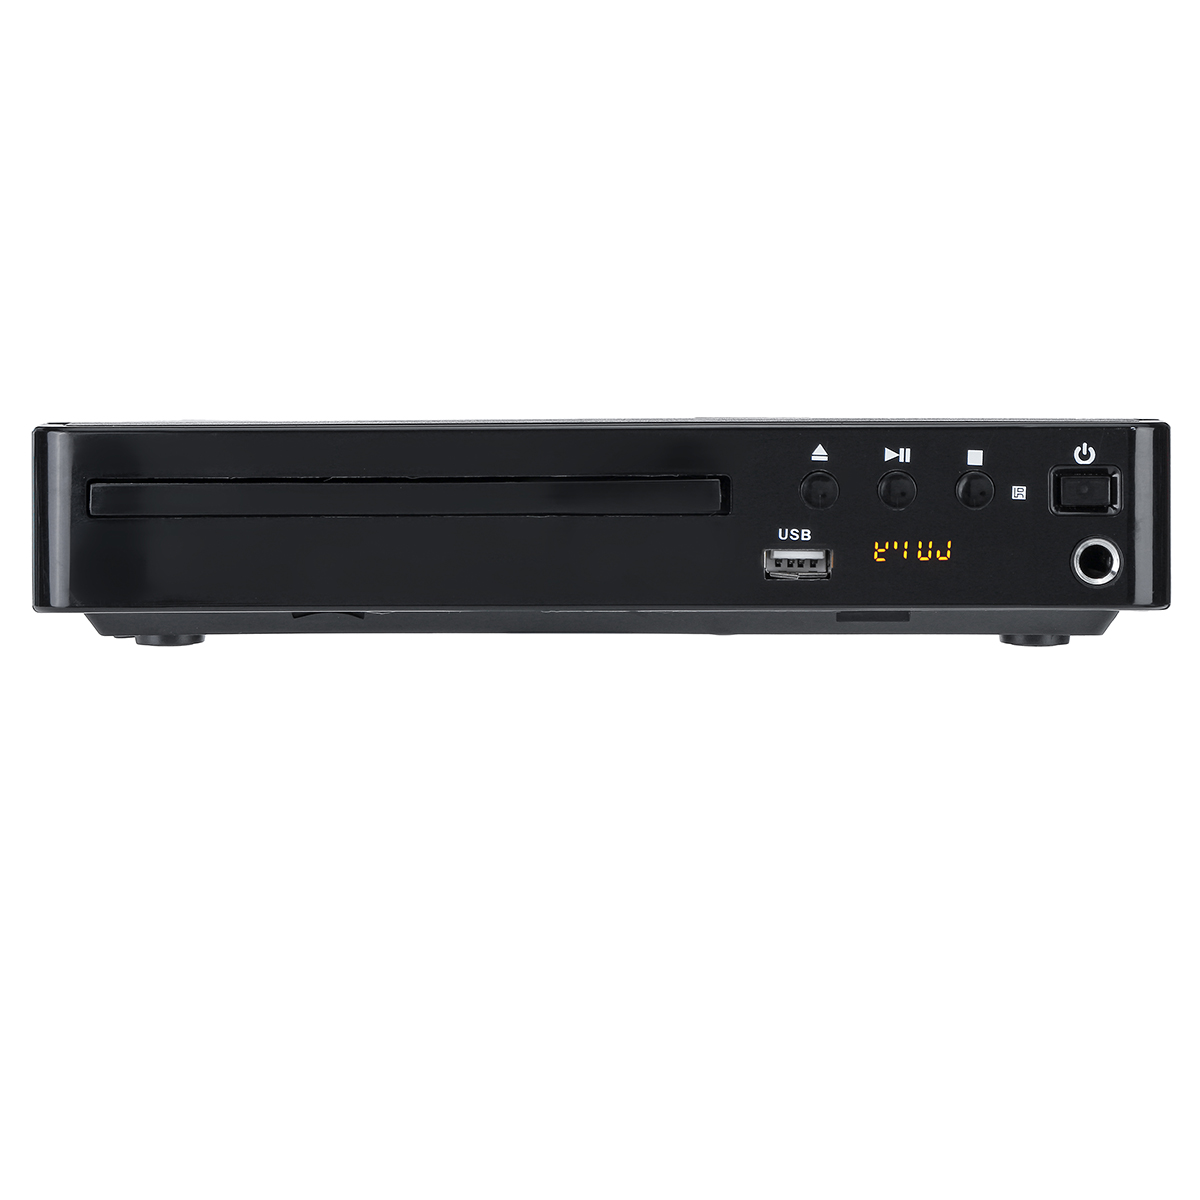 1080P-Full-HD-LCD-DVD-Player-Compact-6-Region-Stereo-Video-MP4-MP3-CD-USB-Remote-1699901